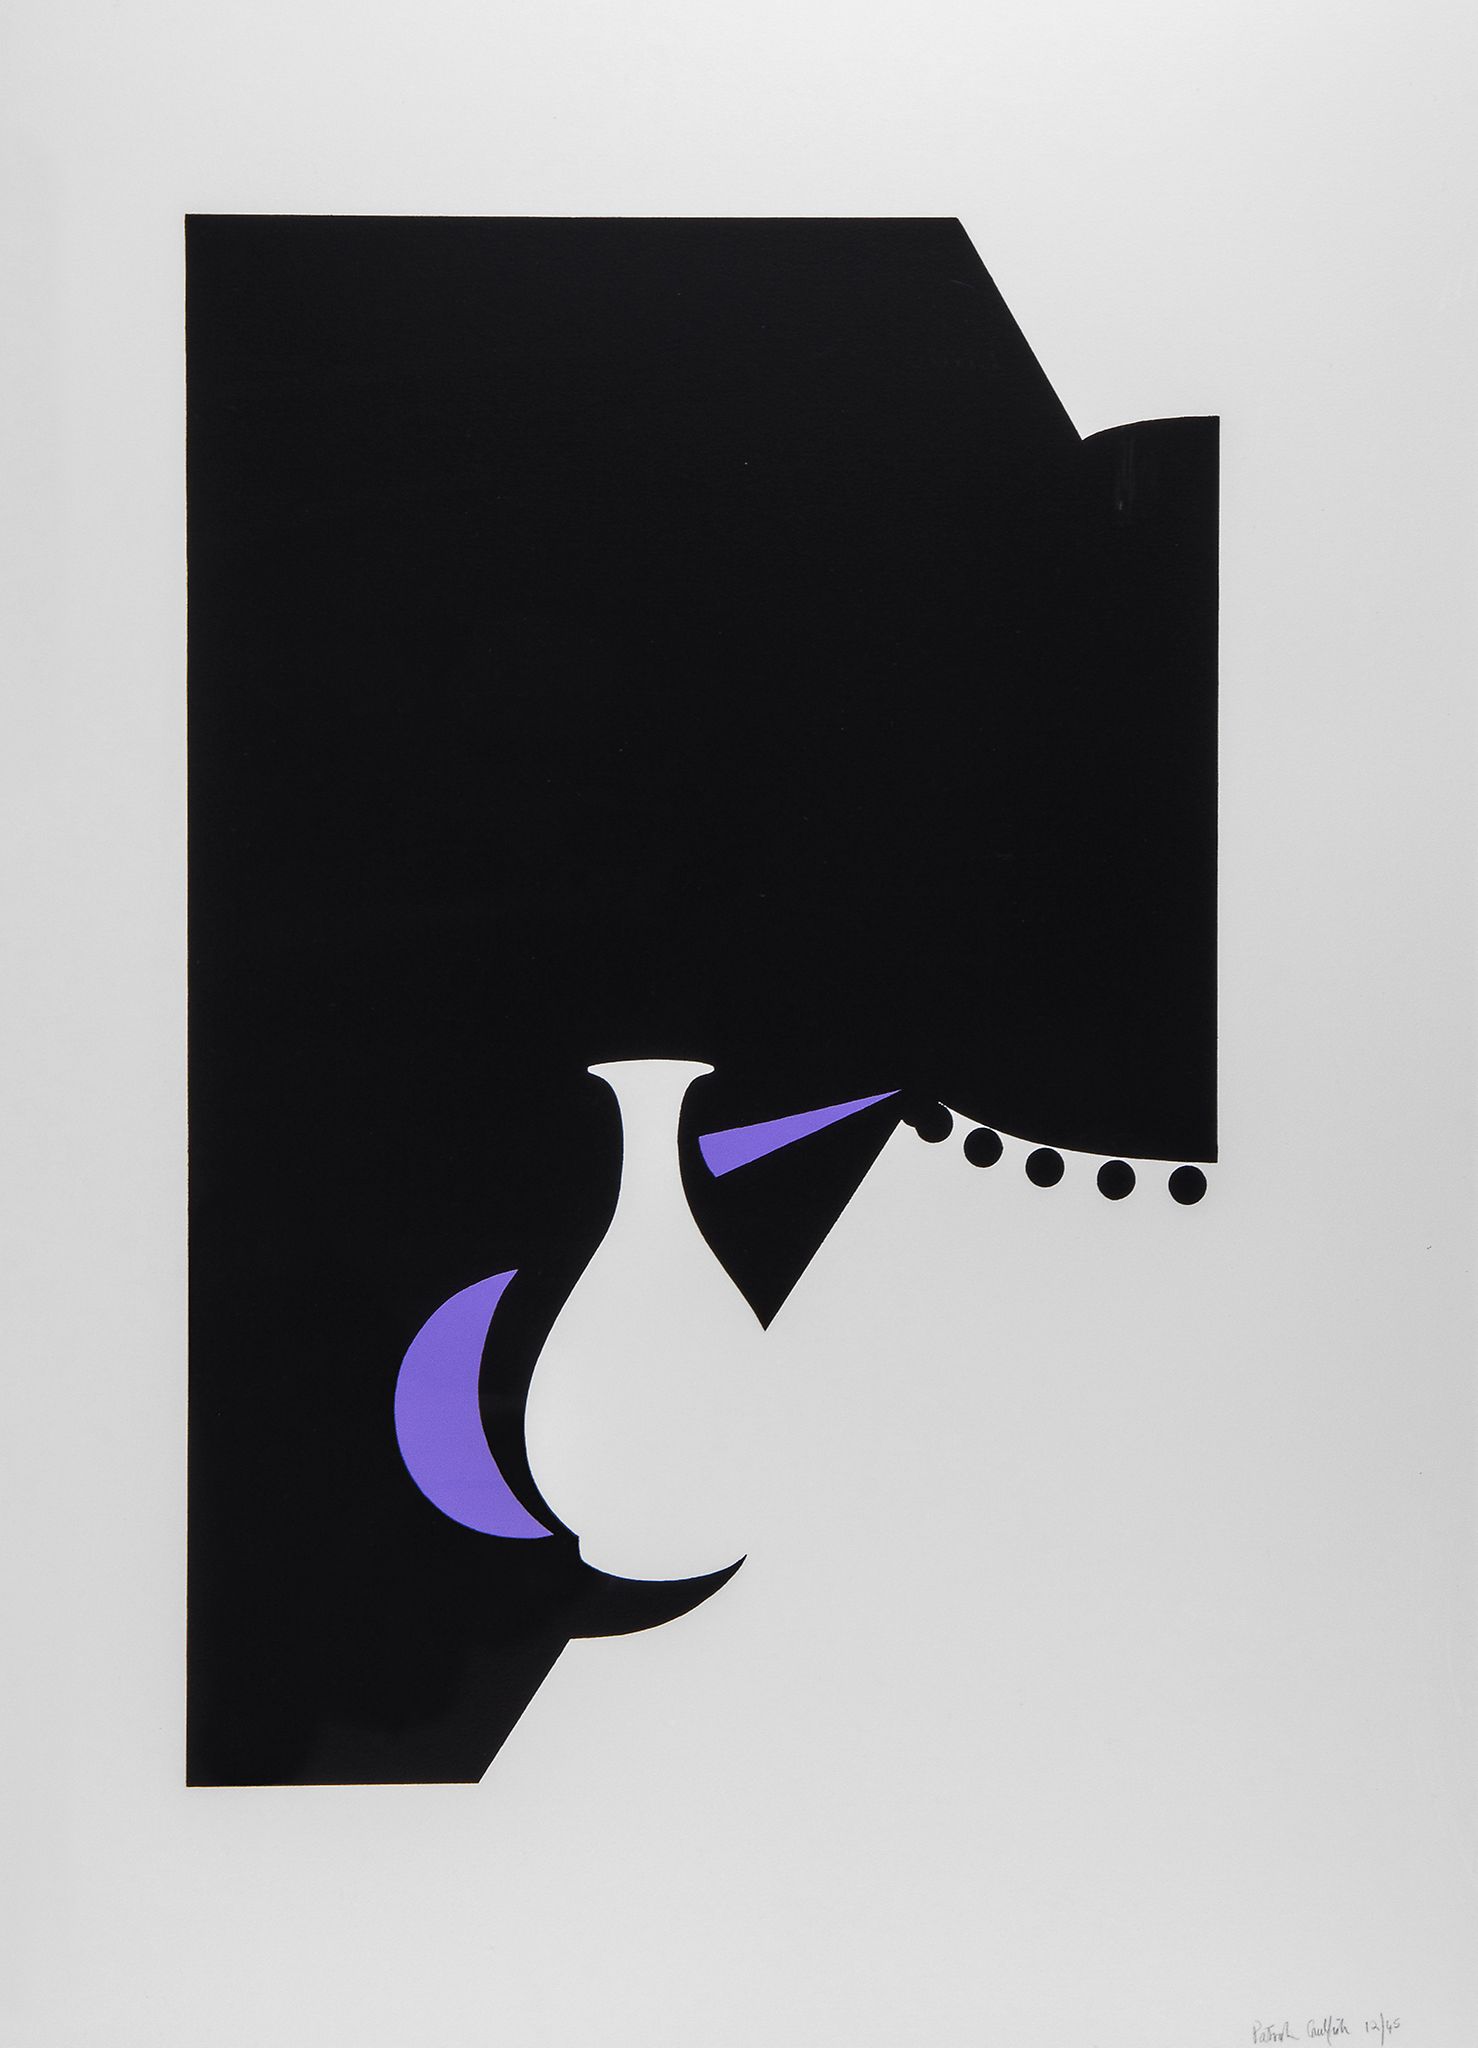 Patrick Caulfield (1936-2005) - Lung Ch'uan Ware and Black Lamp (C.79) screenprint in colours, 1990,